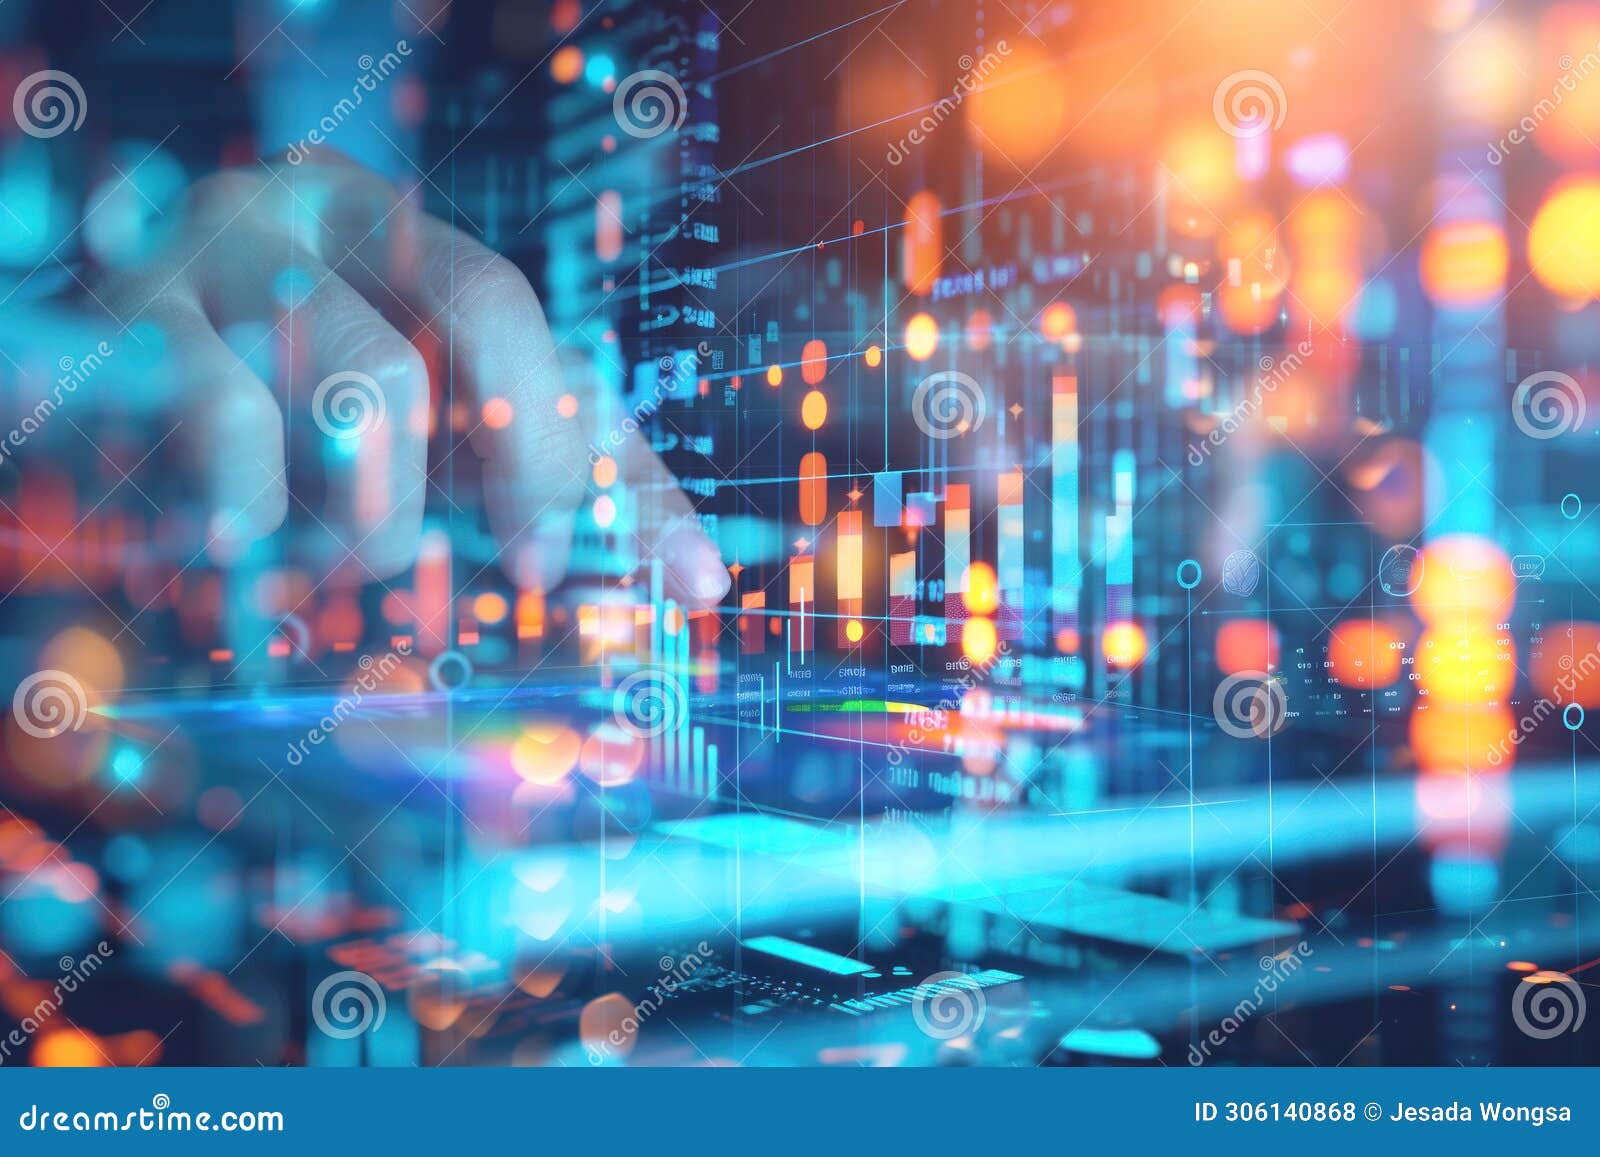 Person using a tablet analytics data with AI ,Abstract Technology Digital Background for management business KPI dashboard report with metrics ,Finance, operations, marketing AI generated